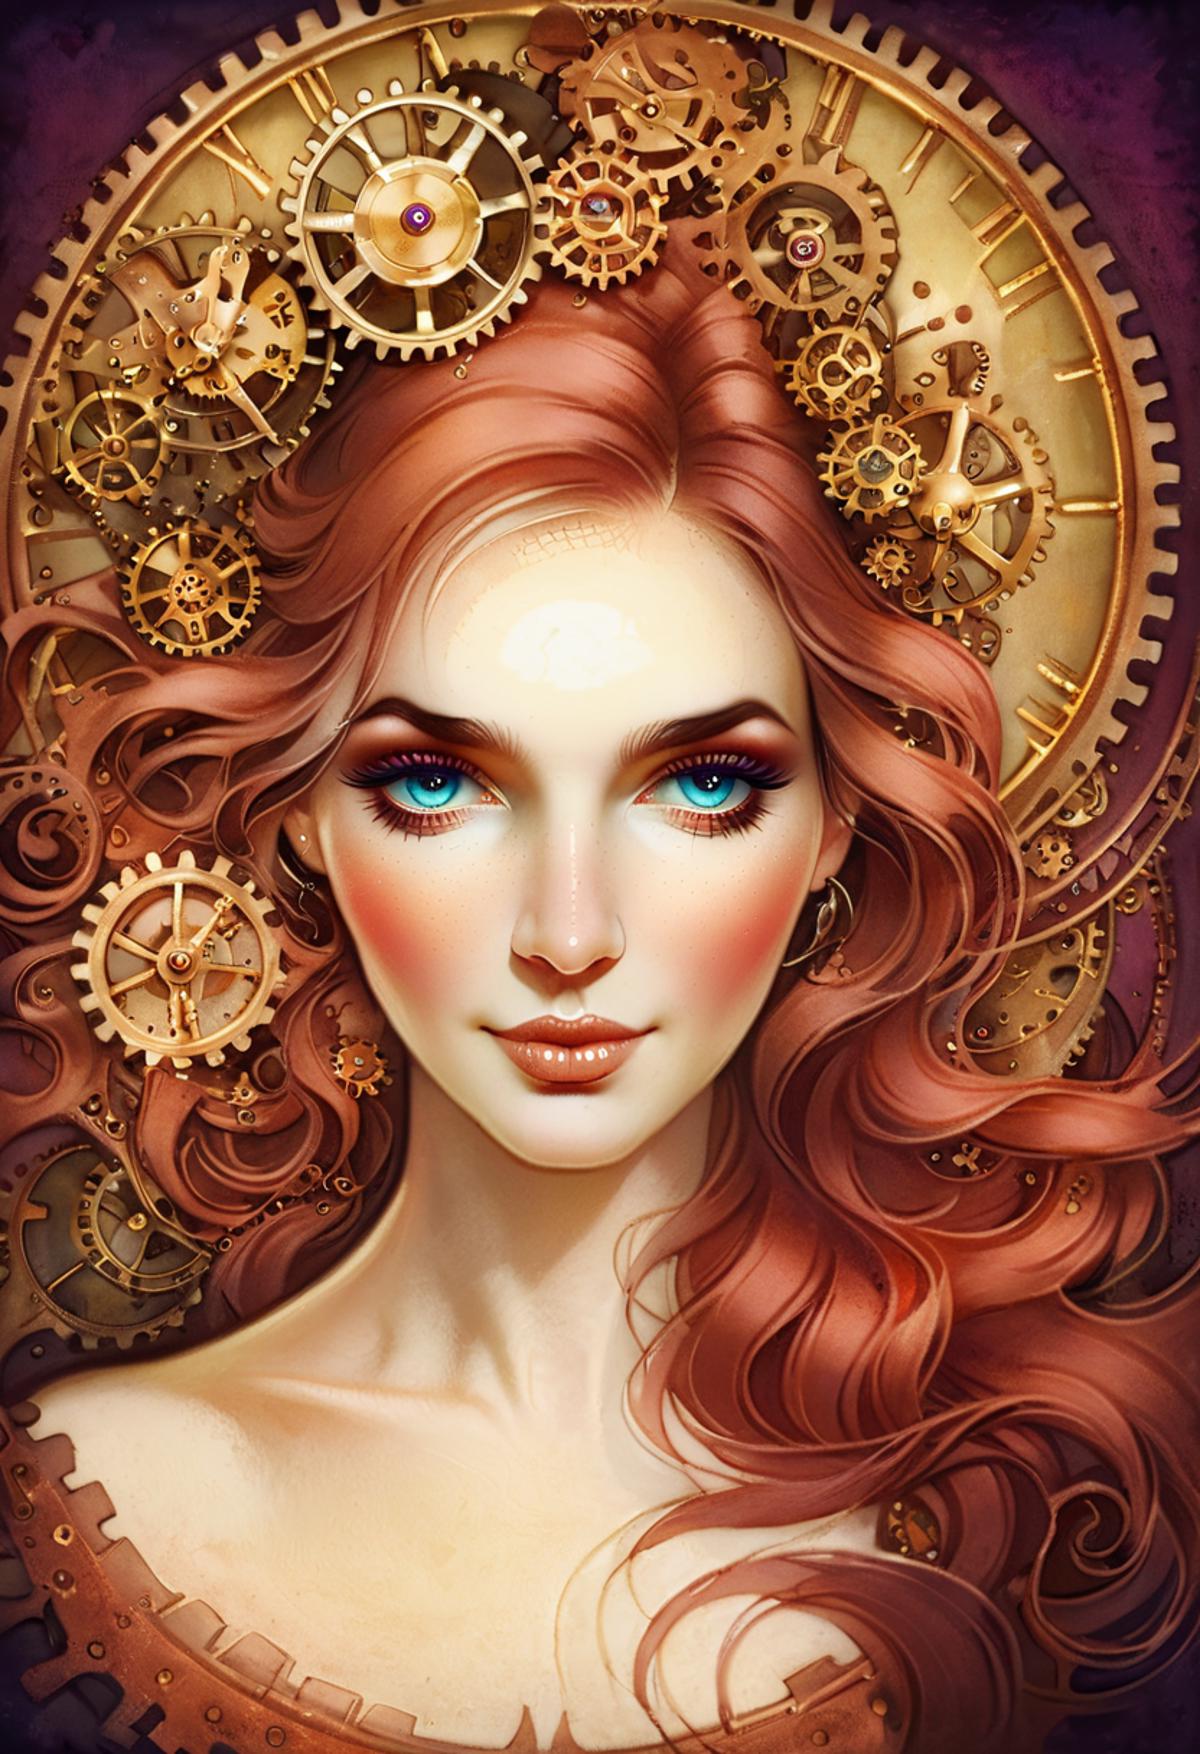 Anna Dittmann Style XL image by tosave